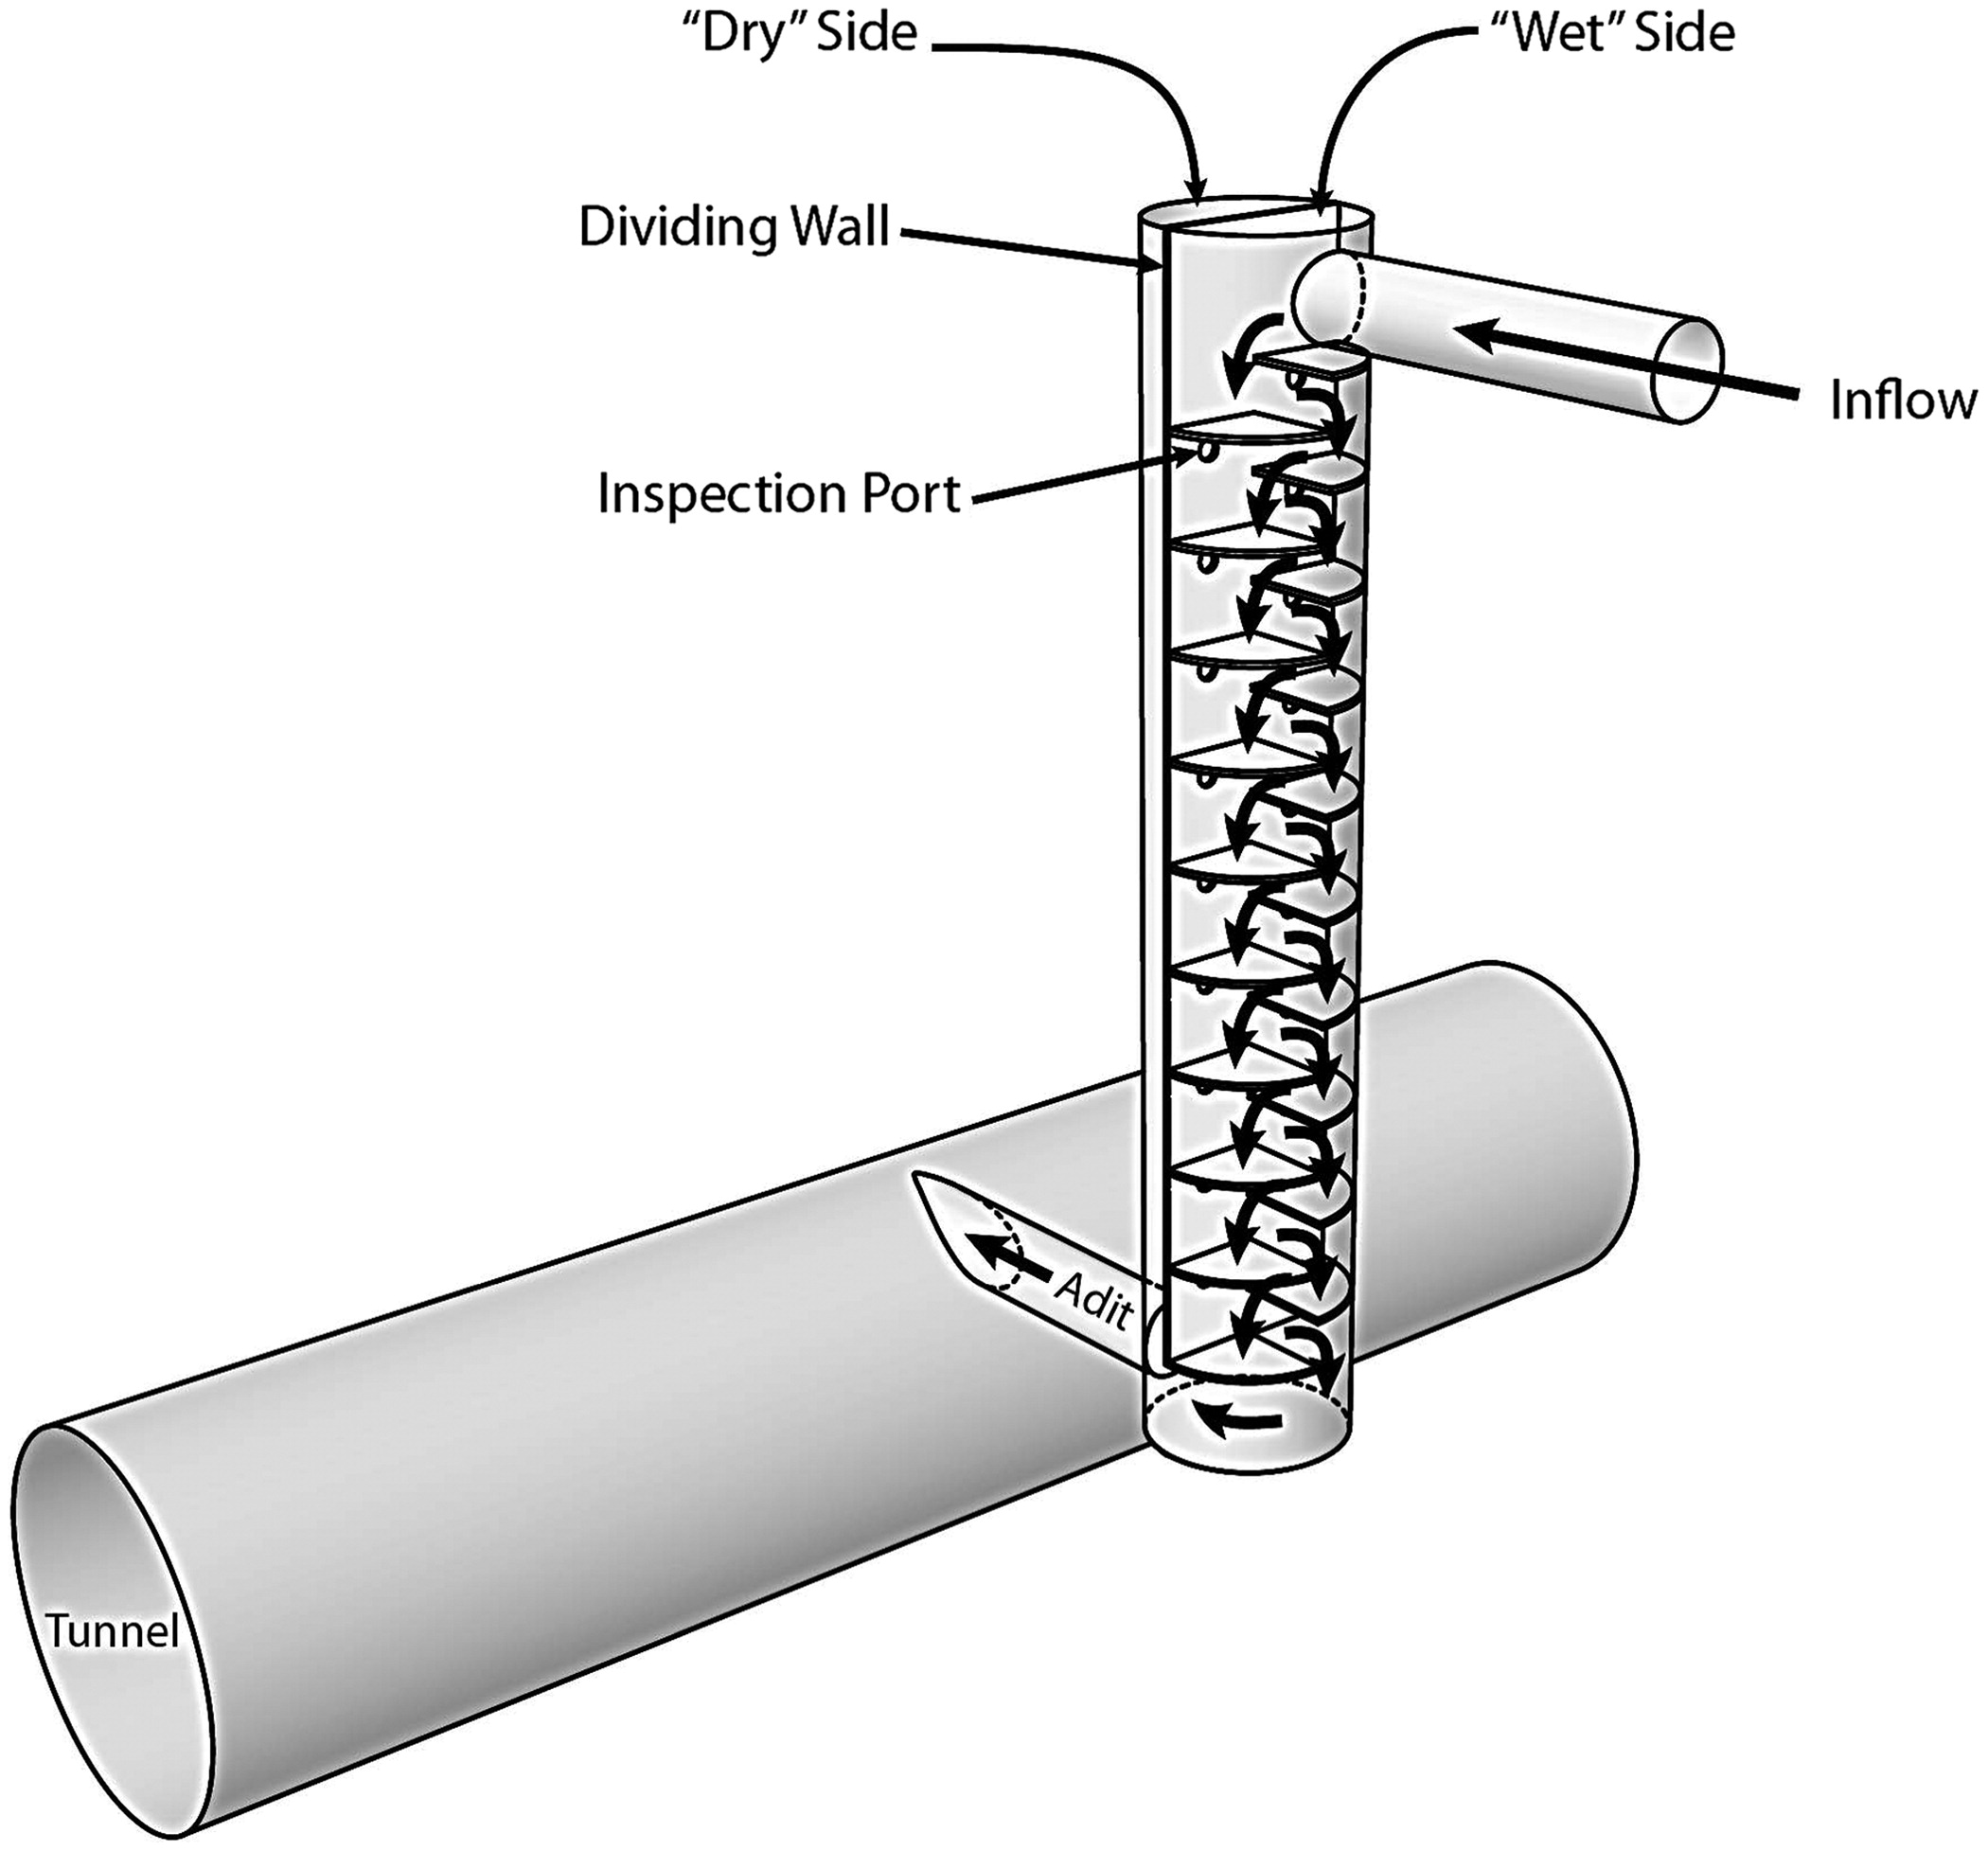 Baffle-Drop Structure Design Relationships | Journal of Hydraulic ...